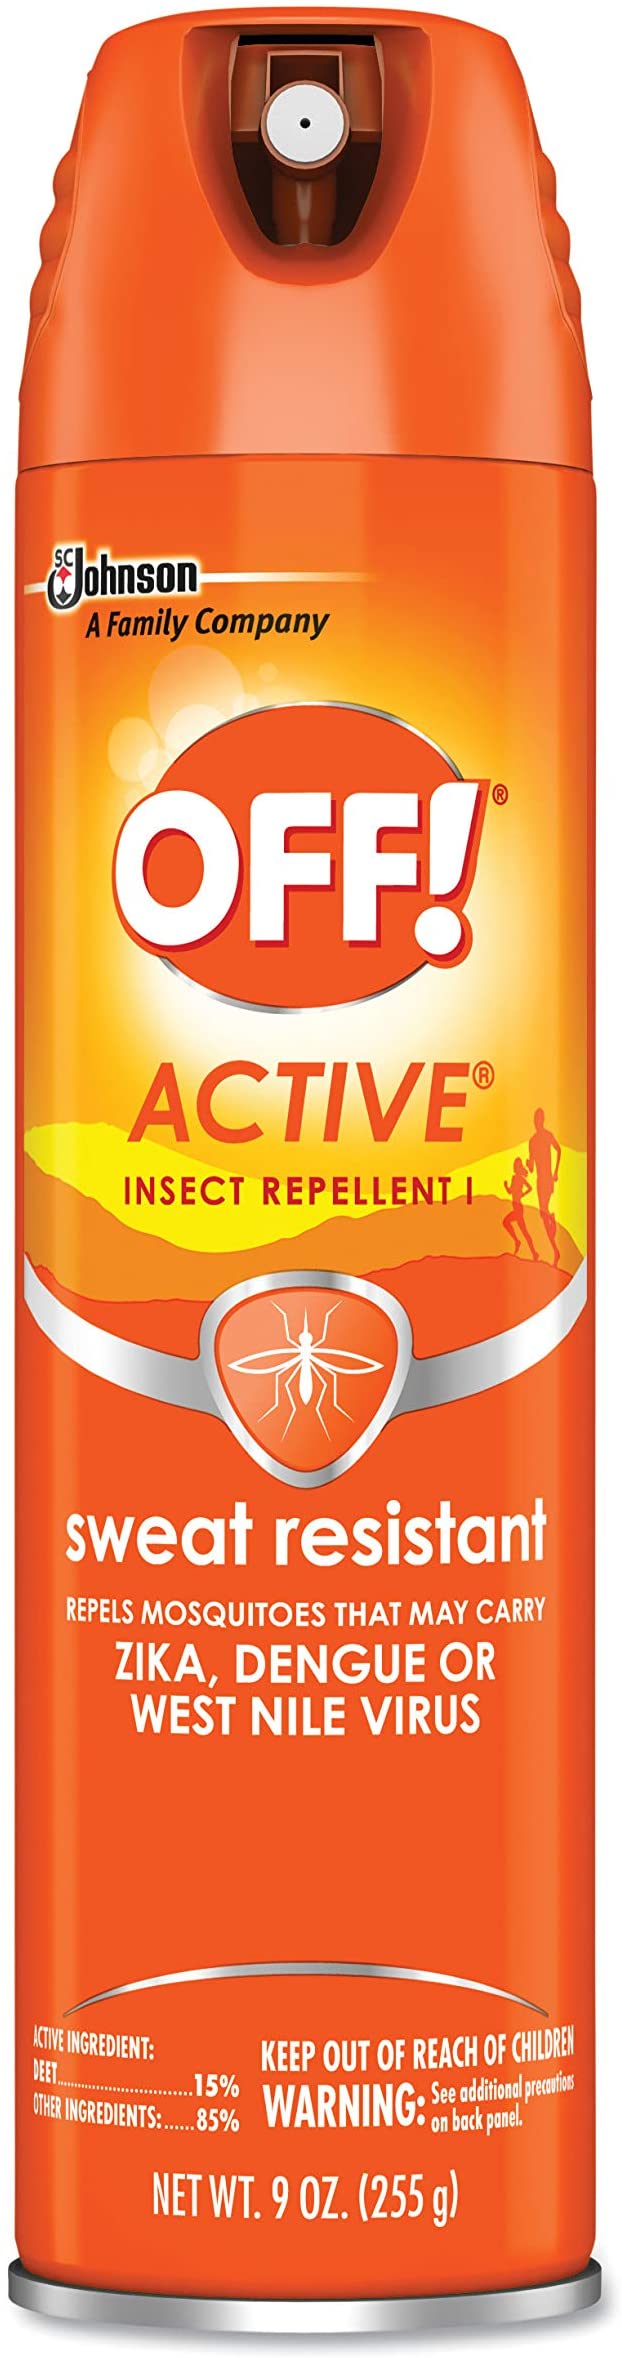 Off! Active Insect Repellent, Sweat Resistant 6 oz (Pack of 12)